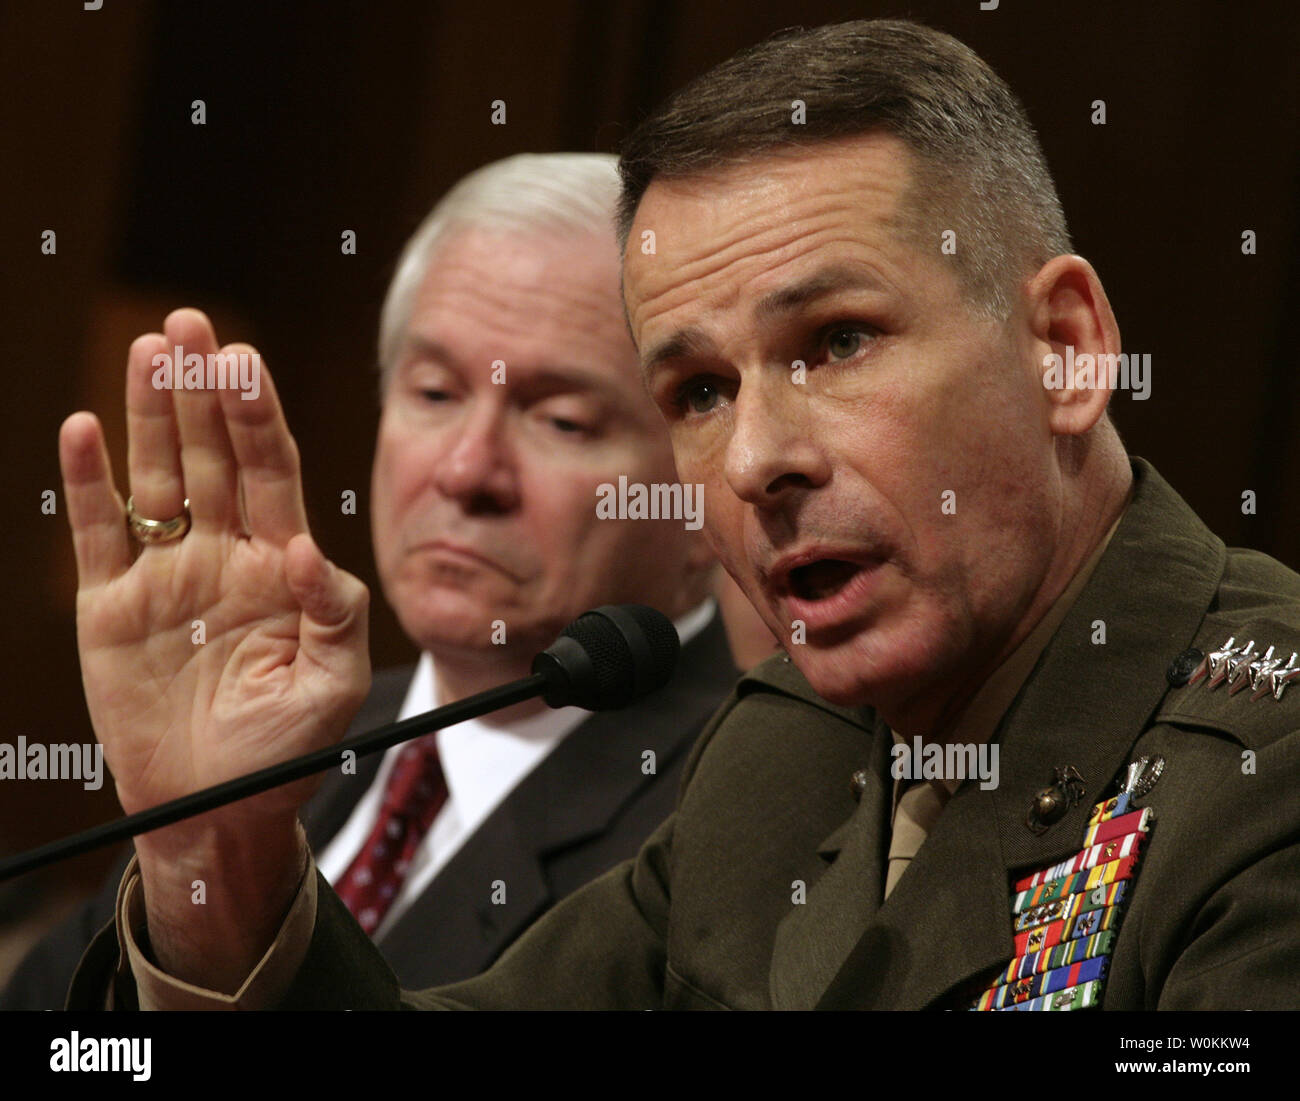 General Peter Pace, Chairman of the Joint Chiefs of Staff, (R) testifies with U.S. Defense Secretary Robert Gates before the Senate Armed Services Committee on Capitol Hill in Washington on January 12, 2007. (UPI Photo/Yuri Gripas) Stock Photo